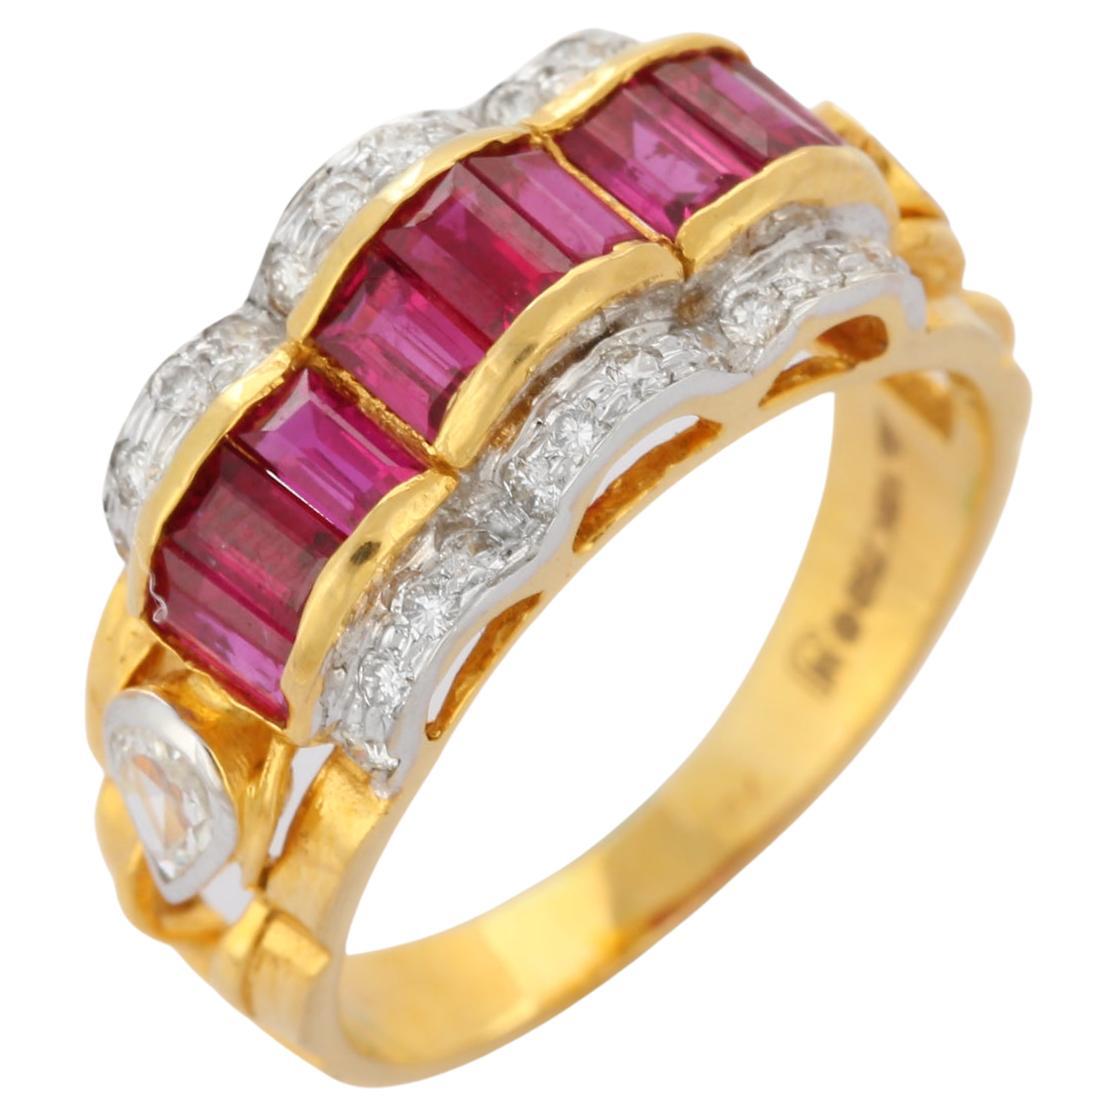 For Sale:  Contemporary 2.7 ct Ruby and Diamond Wedding Ring in 18K Yellow Gold